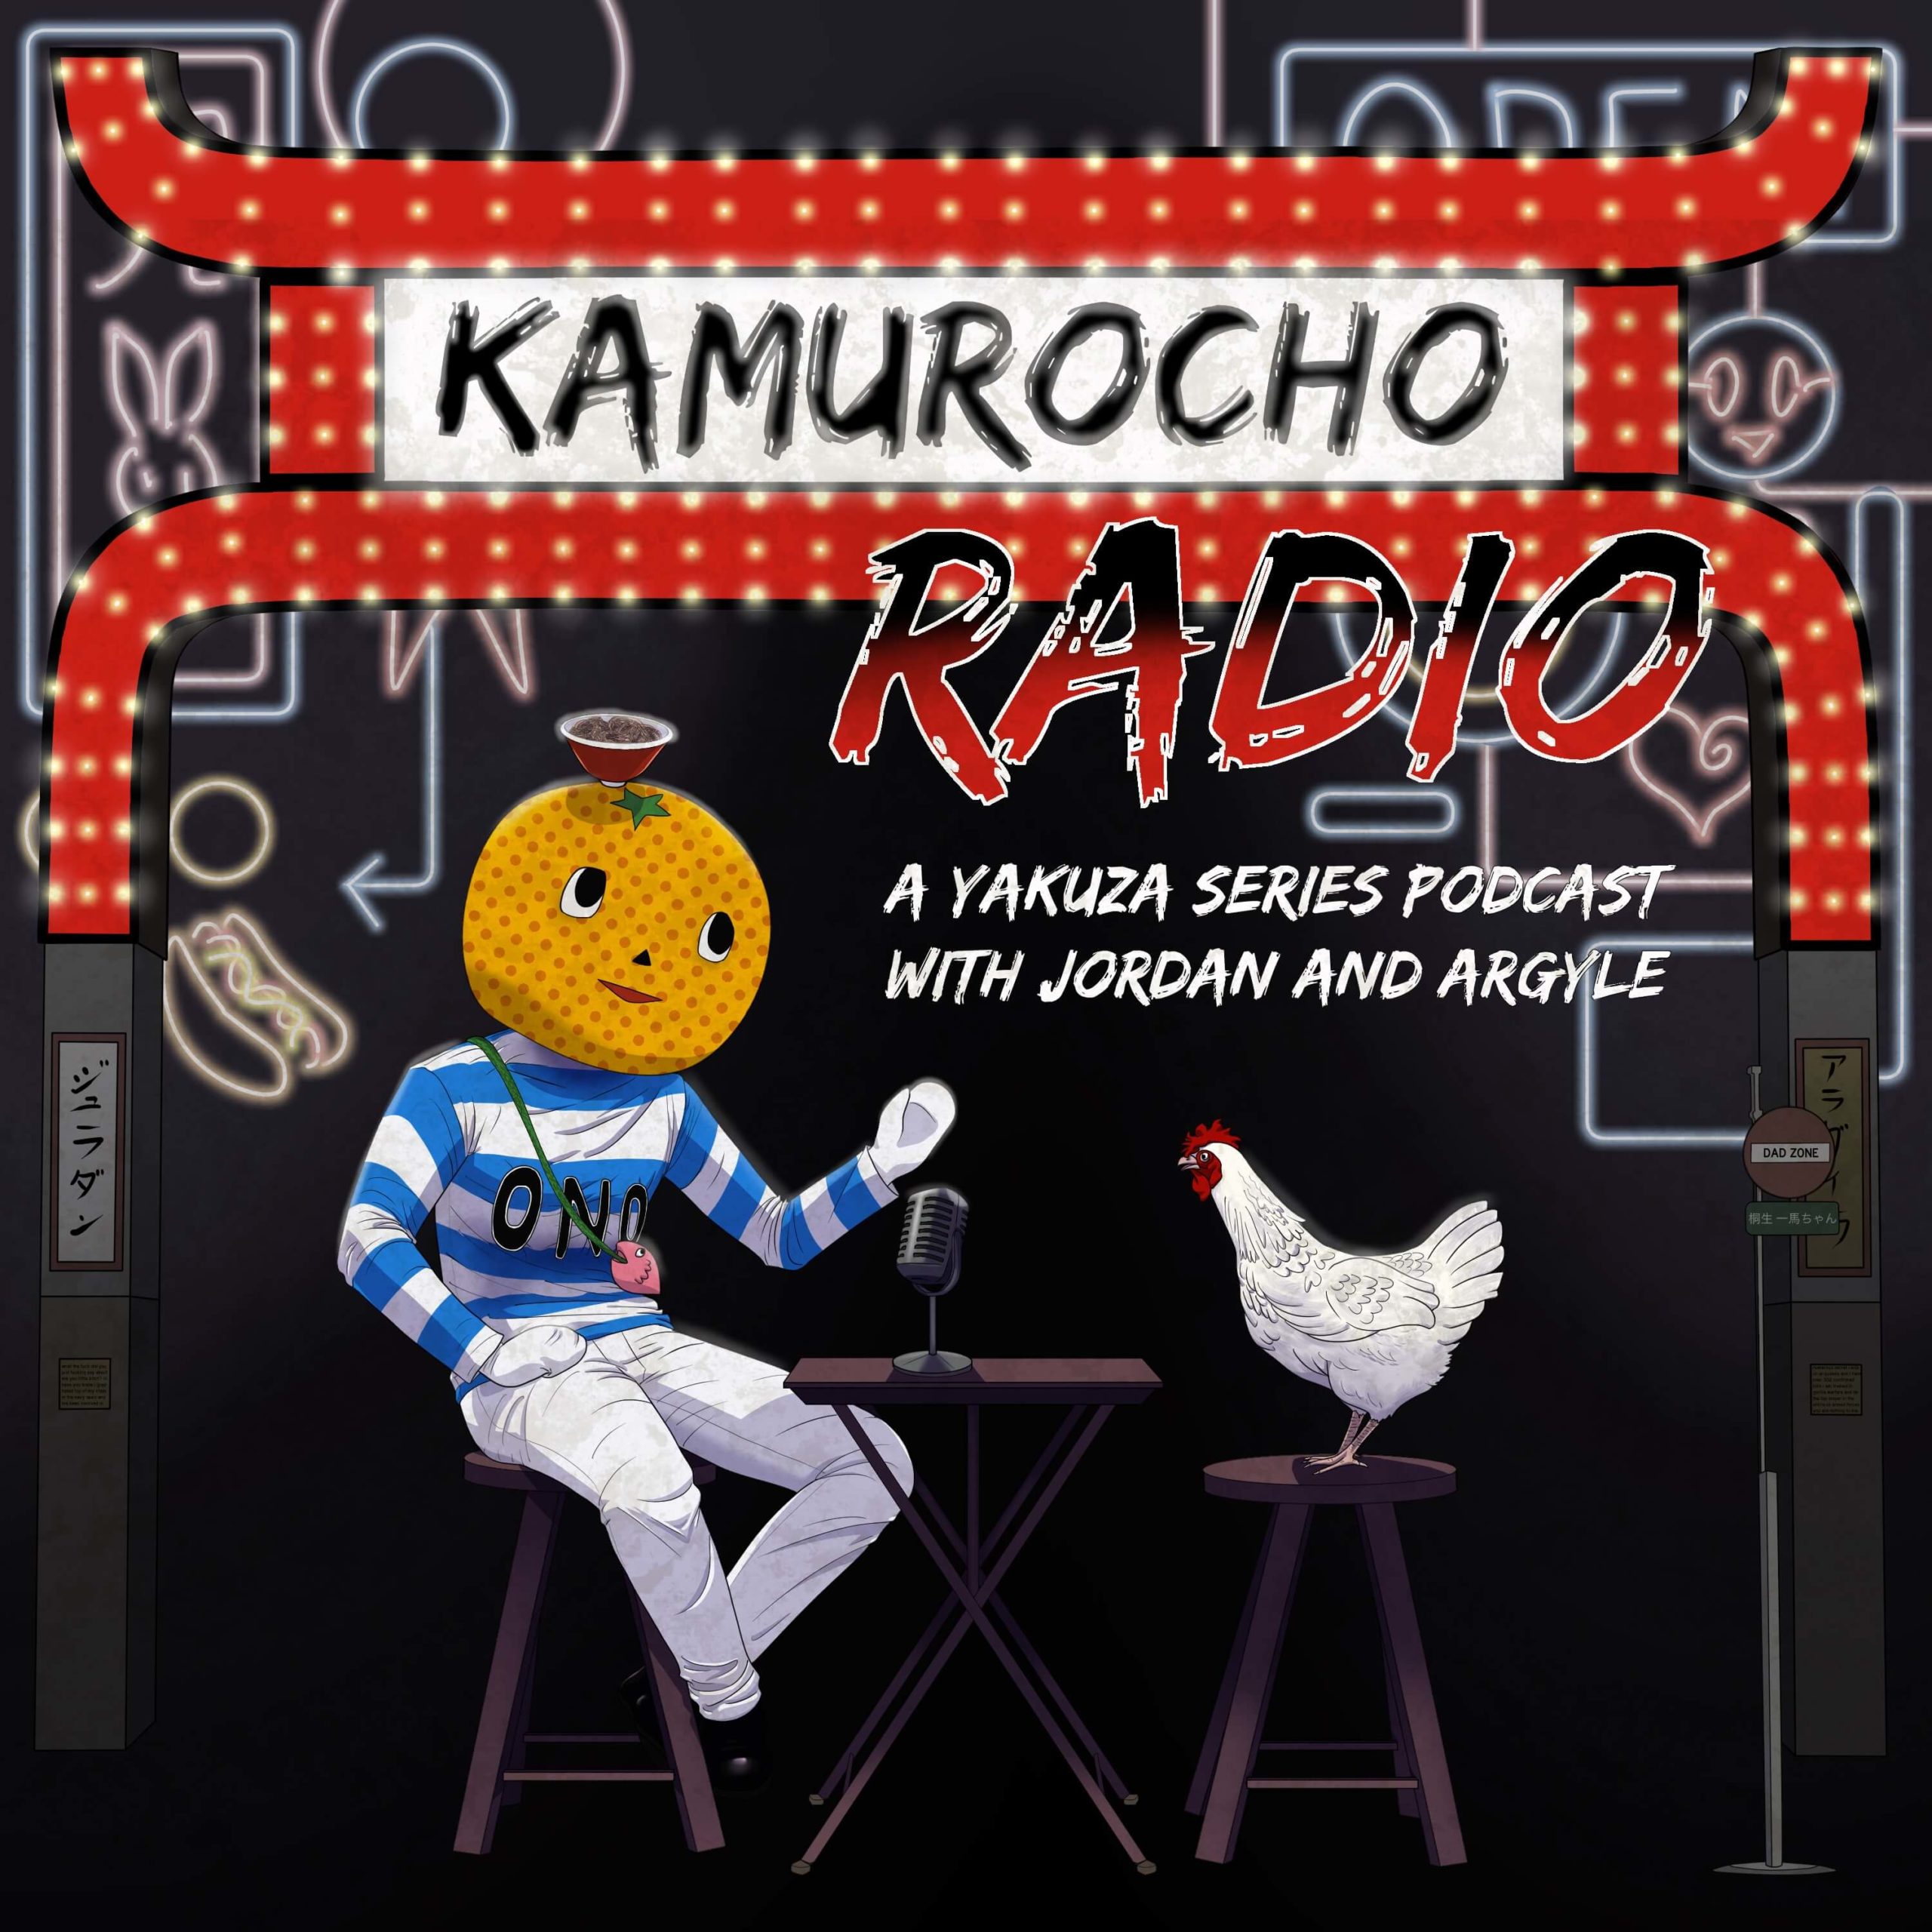 Episode 56: The Disappearance of Kamurocho Hills by the Coward RGG Studios